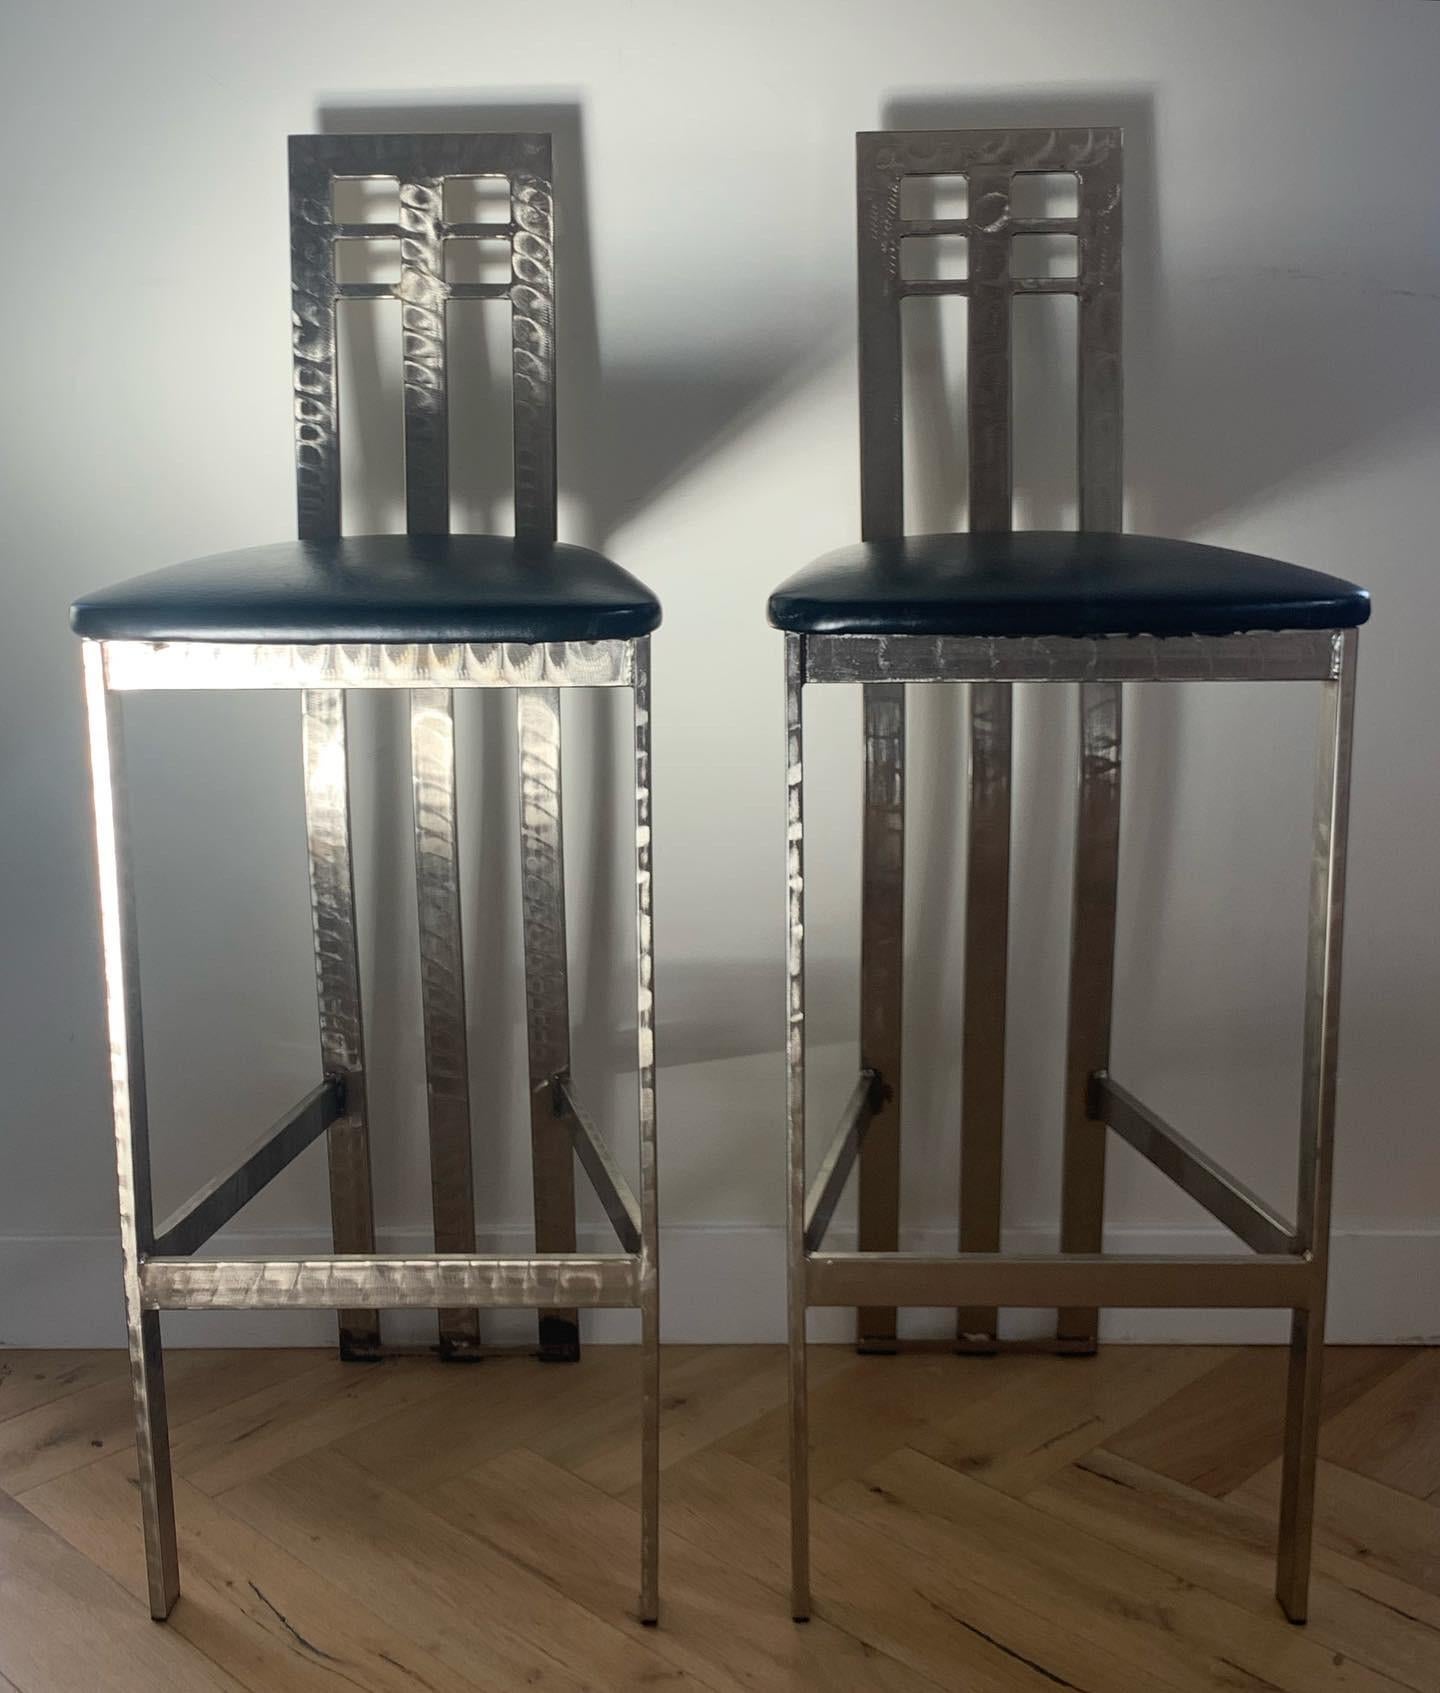 Pair of Brutalist /Futurist style vintage bar stools in treated chrome and black leather circa early 1990s. Some scruff to the metal (slide 5) and minor wear to leather (slide 6), but overall fab condition. Please don’t hesitate to reach out for a